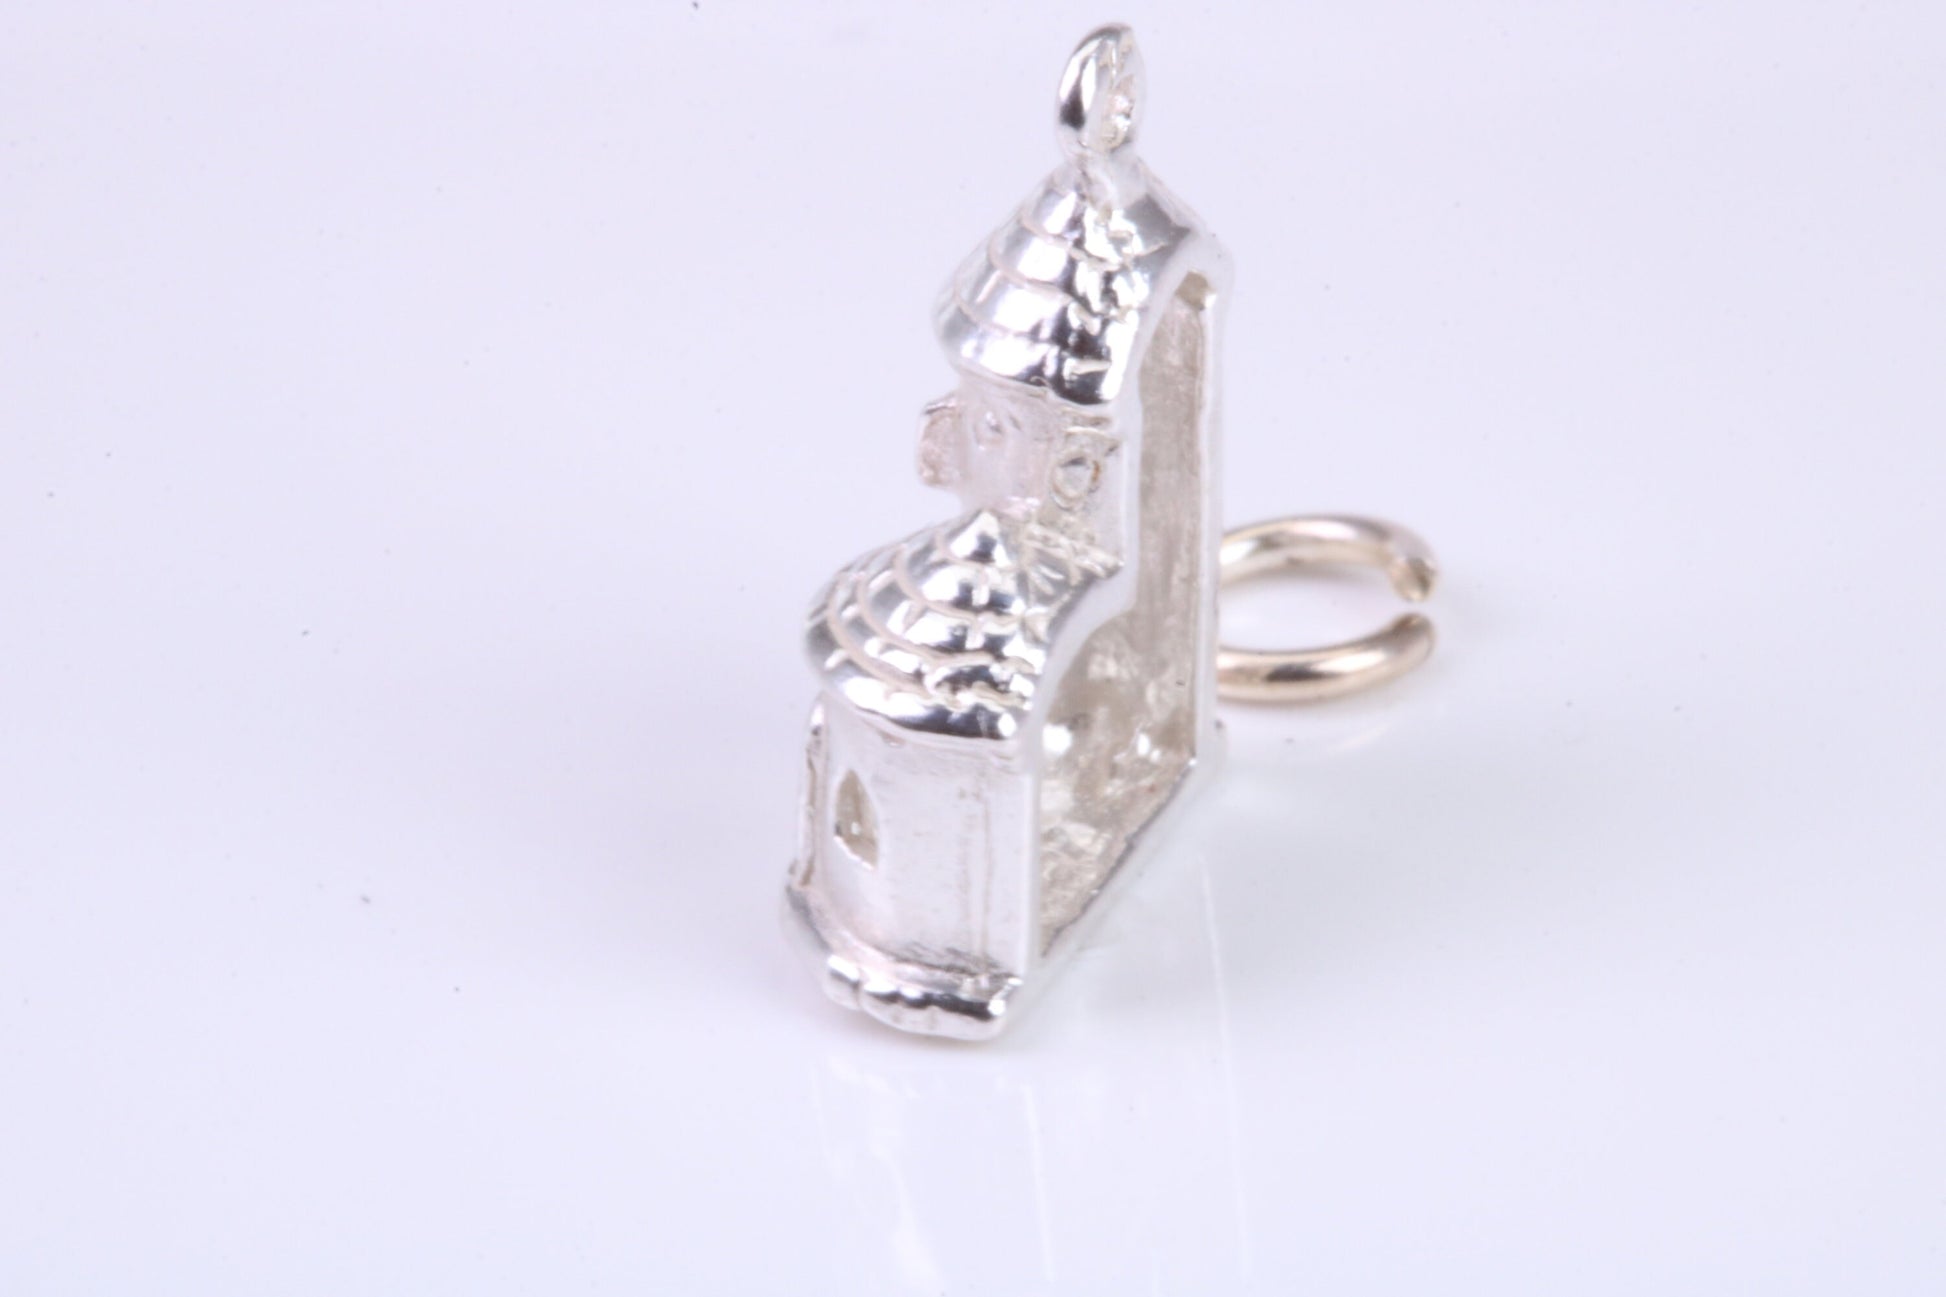 Castle Charm, Traditional Charm, Made from Solid 925 Grade Sterling Silver, Complete with Attachment Link